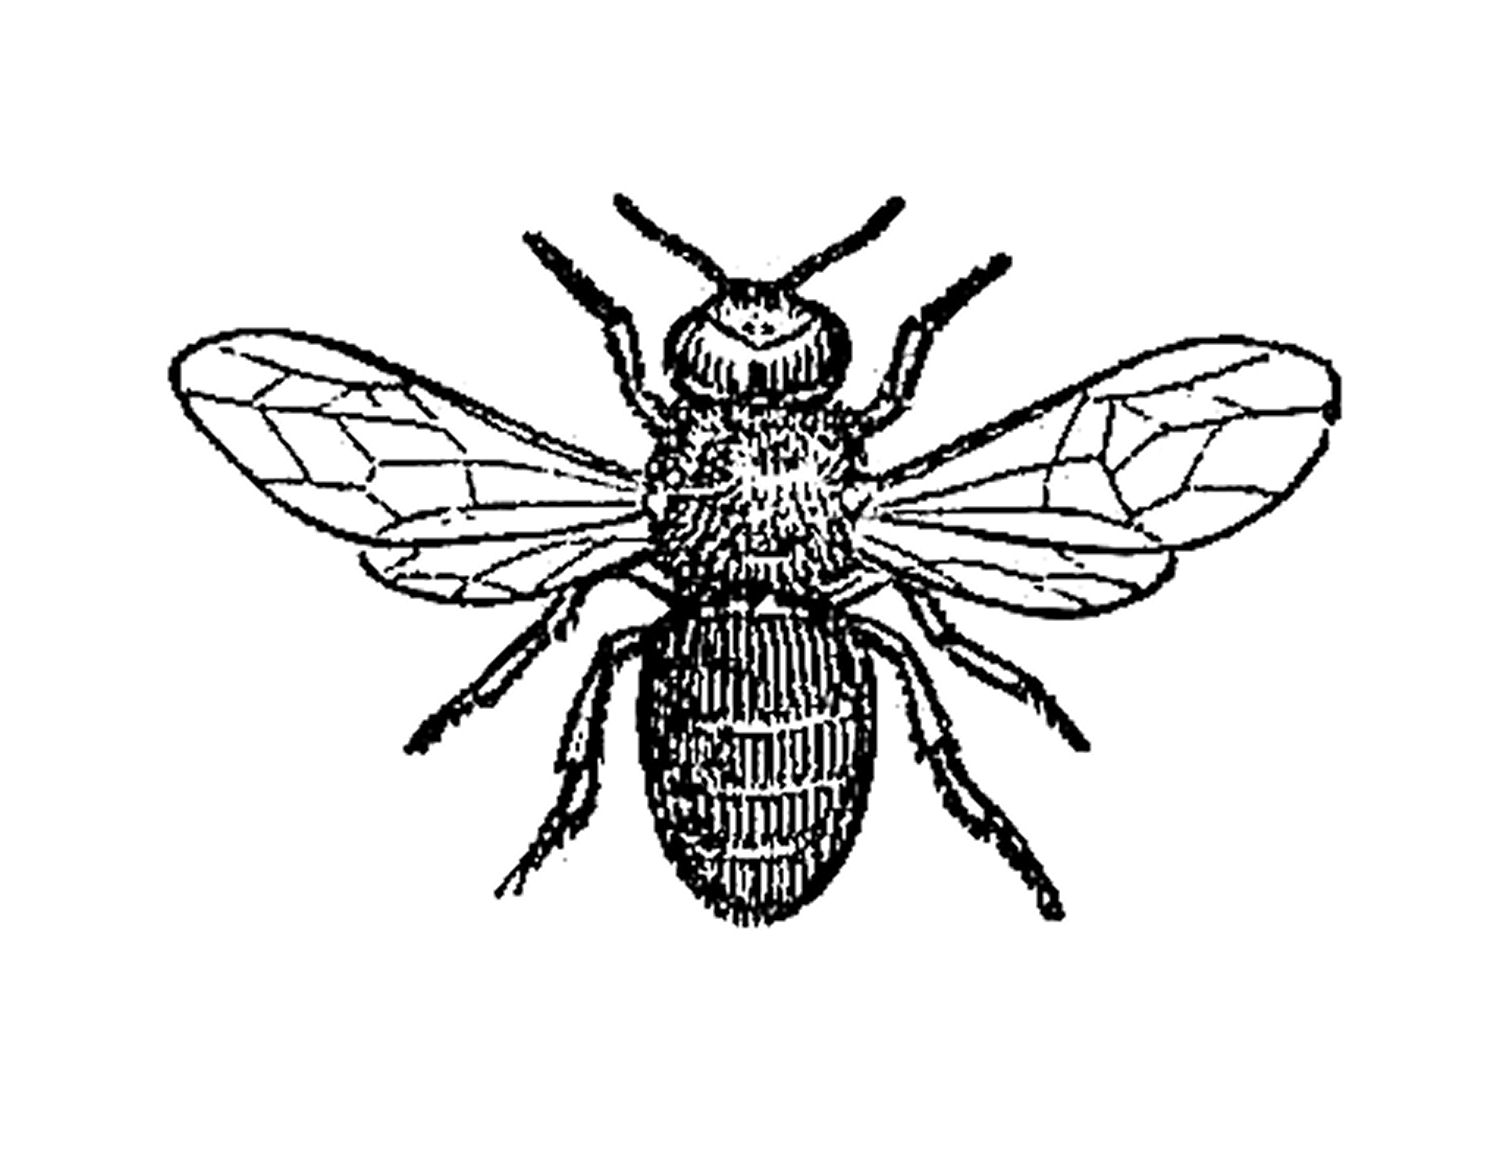 Antique Images: Insect Clip Art: Black and White Illustration of 